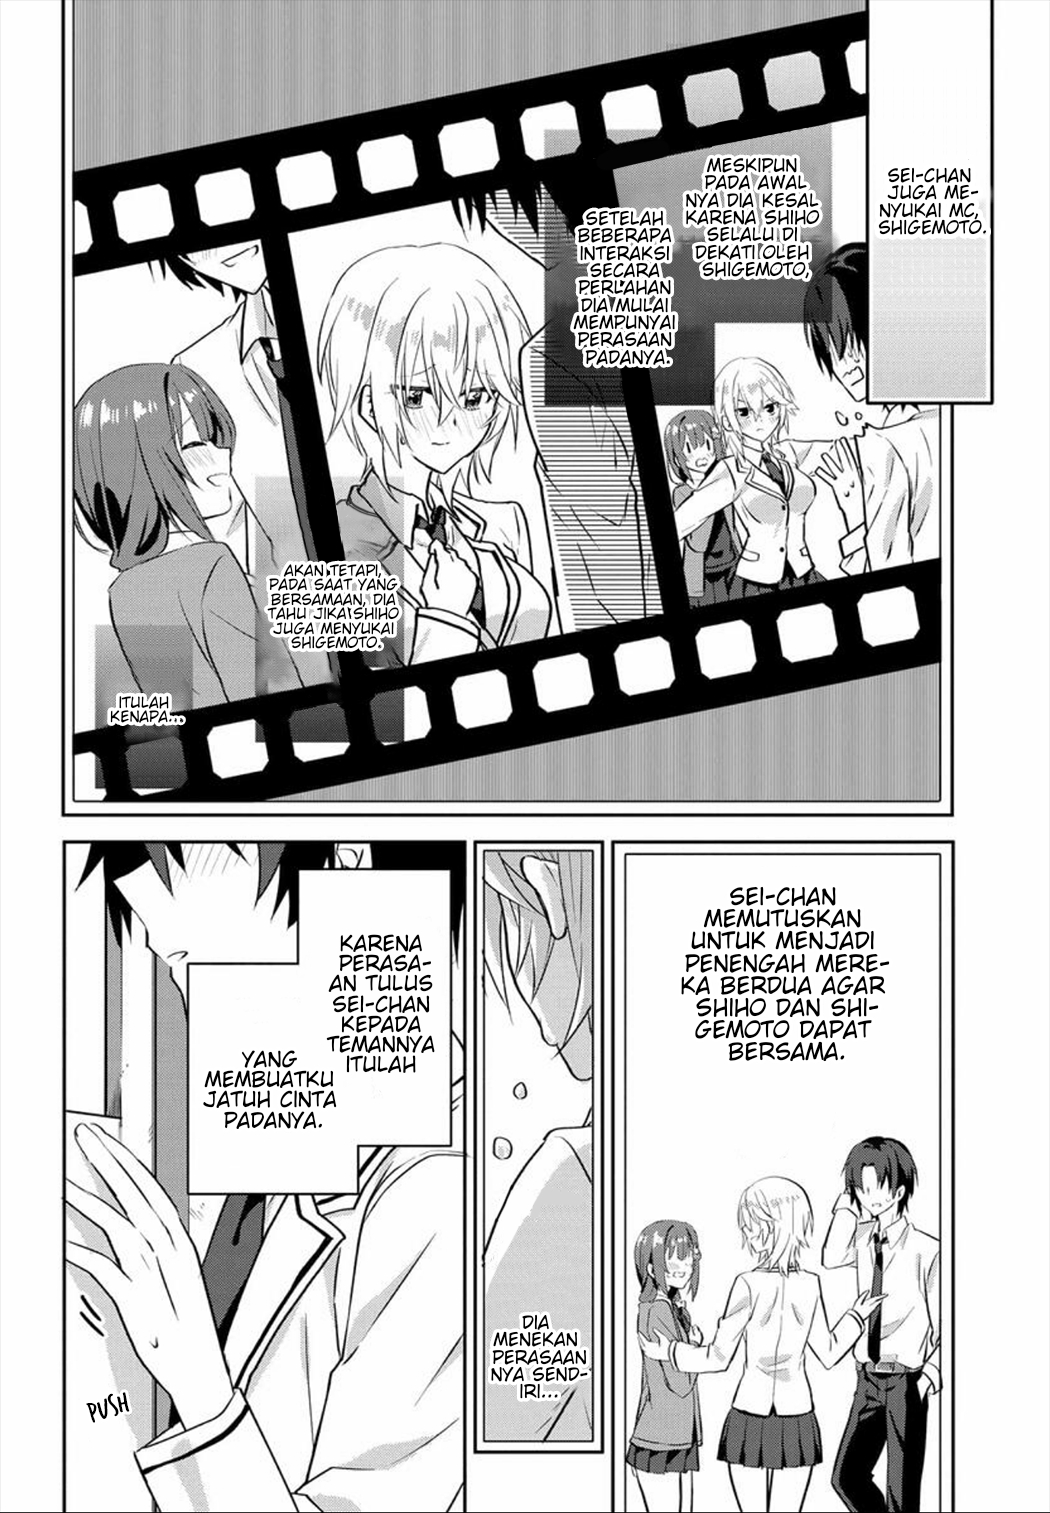 Since I'Ve Entered The World Of Romantic Comedy Manga, I'Ll Do My Best To Make The Losing Heroine Happy. Chapter 1 - 227